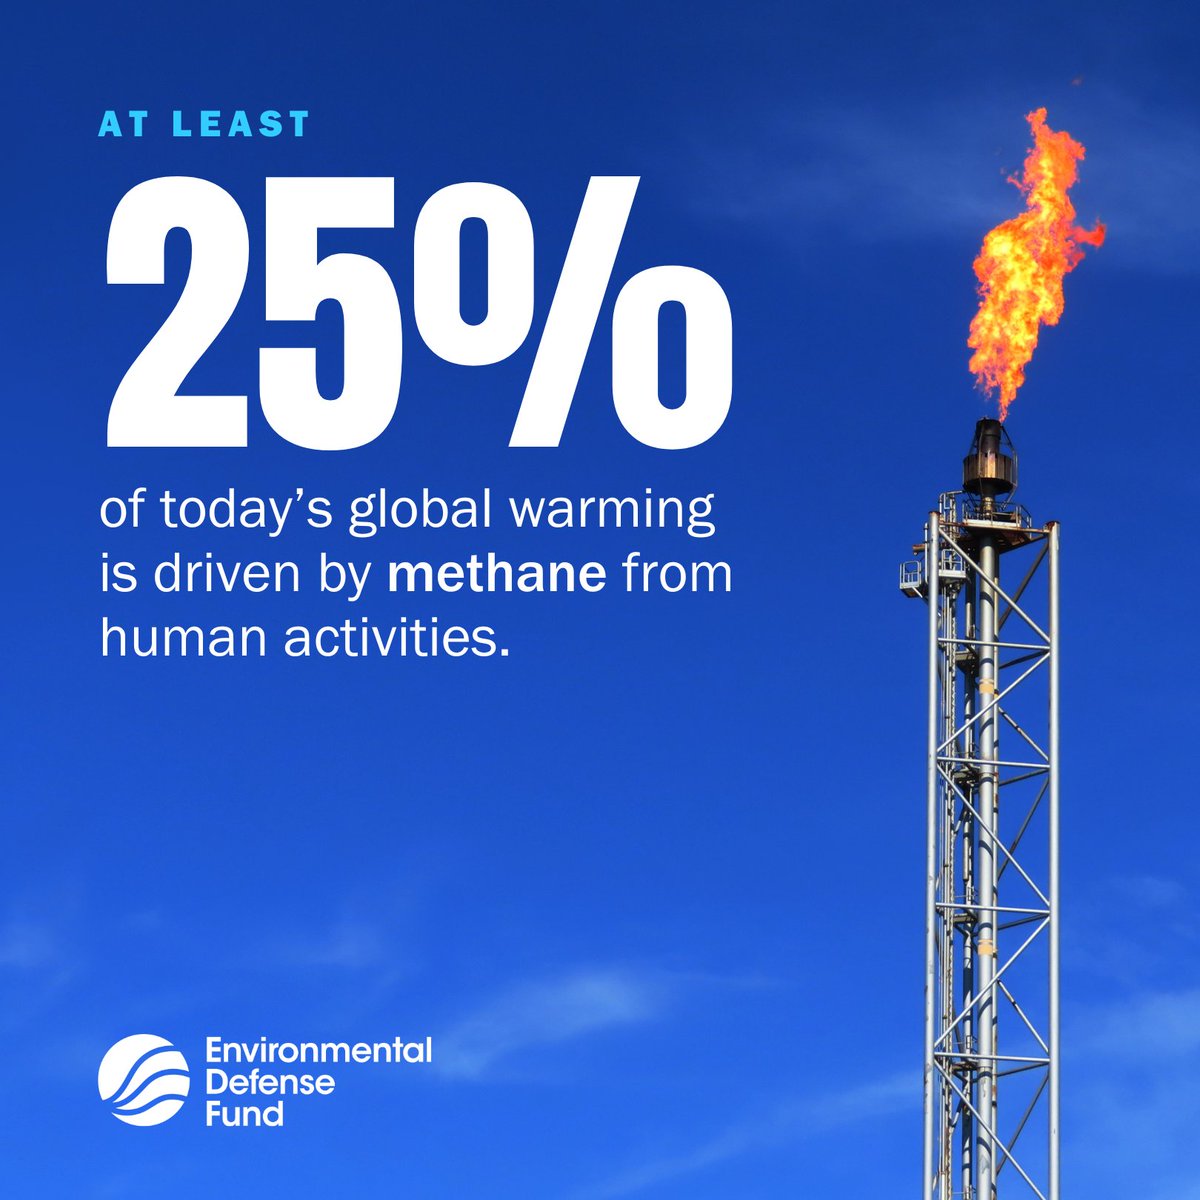 Your #FridayFact 👉 at least a quarter of today’s #GlobalWarming is driven by methane from human activities. #Methane pollution is a leading cause of current warming. In the next decade, methane from all sources will warm the planet more than the burning of fossil fuels 🌡️🌍.